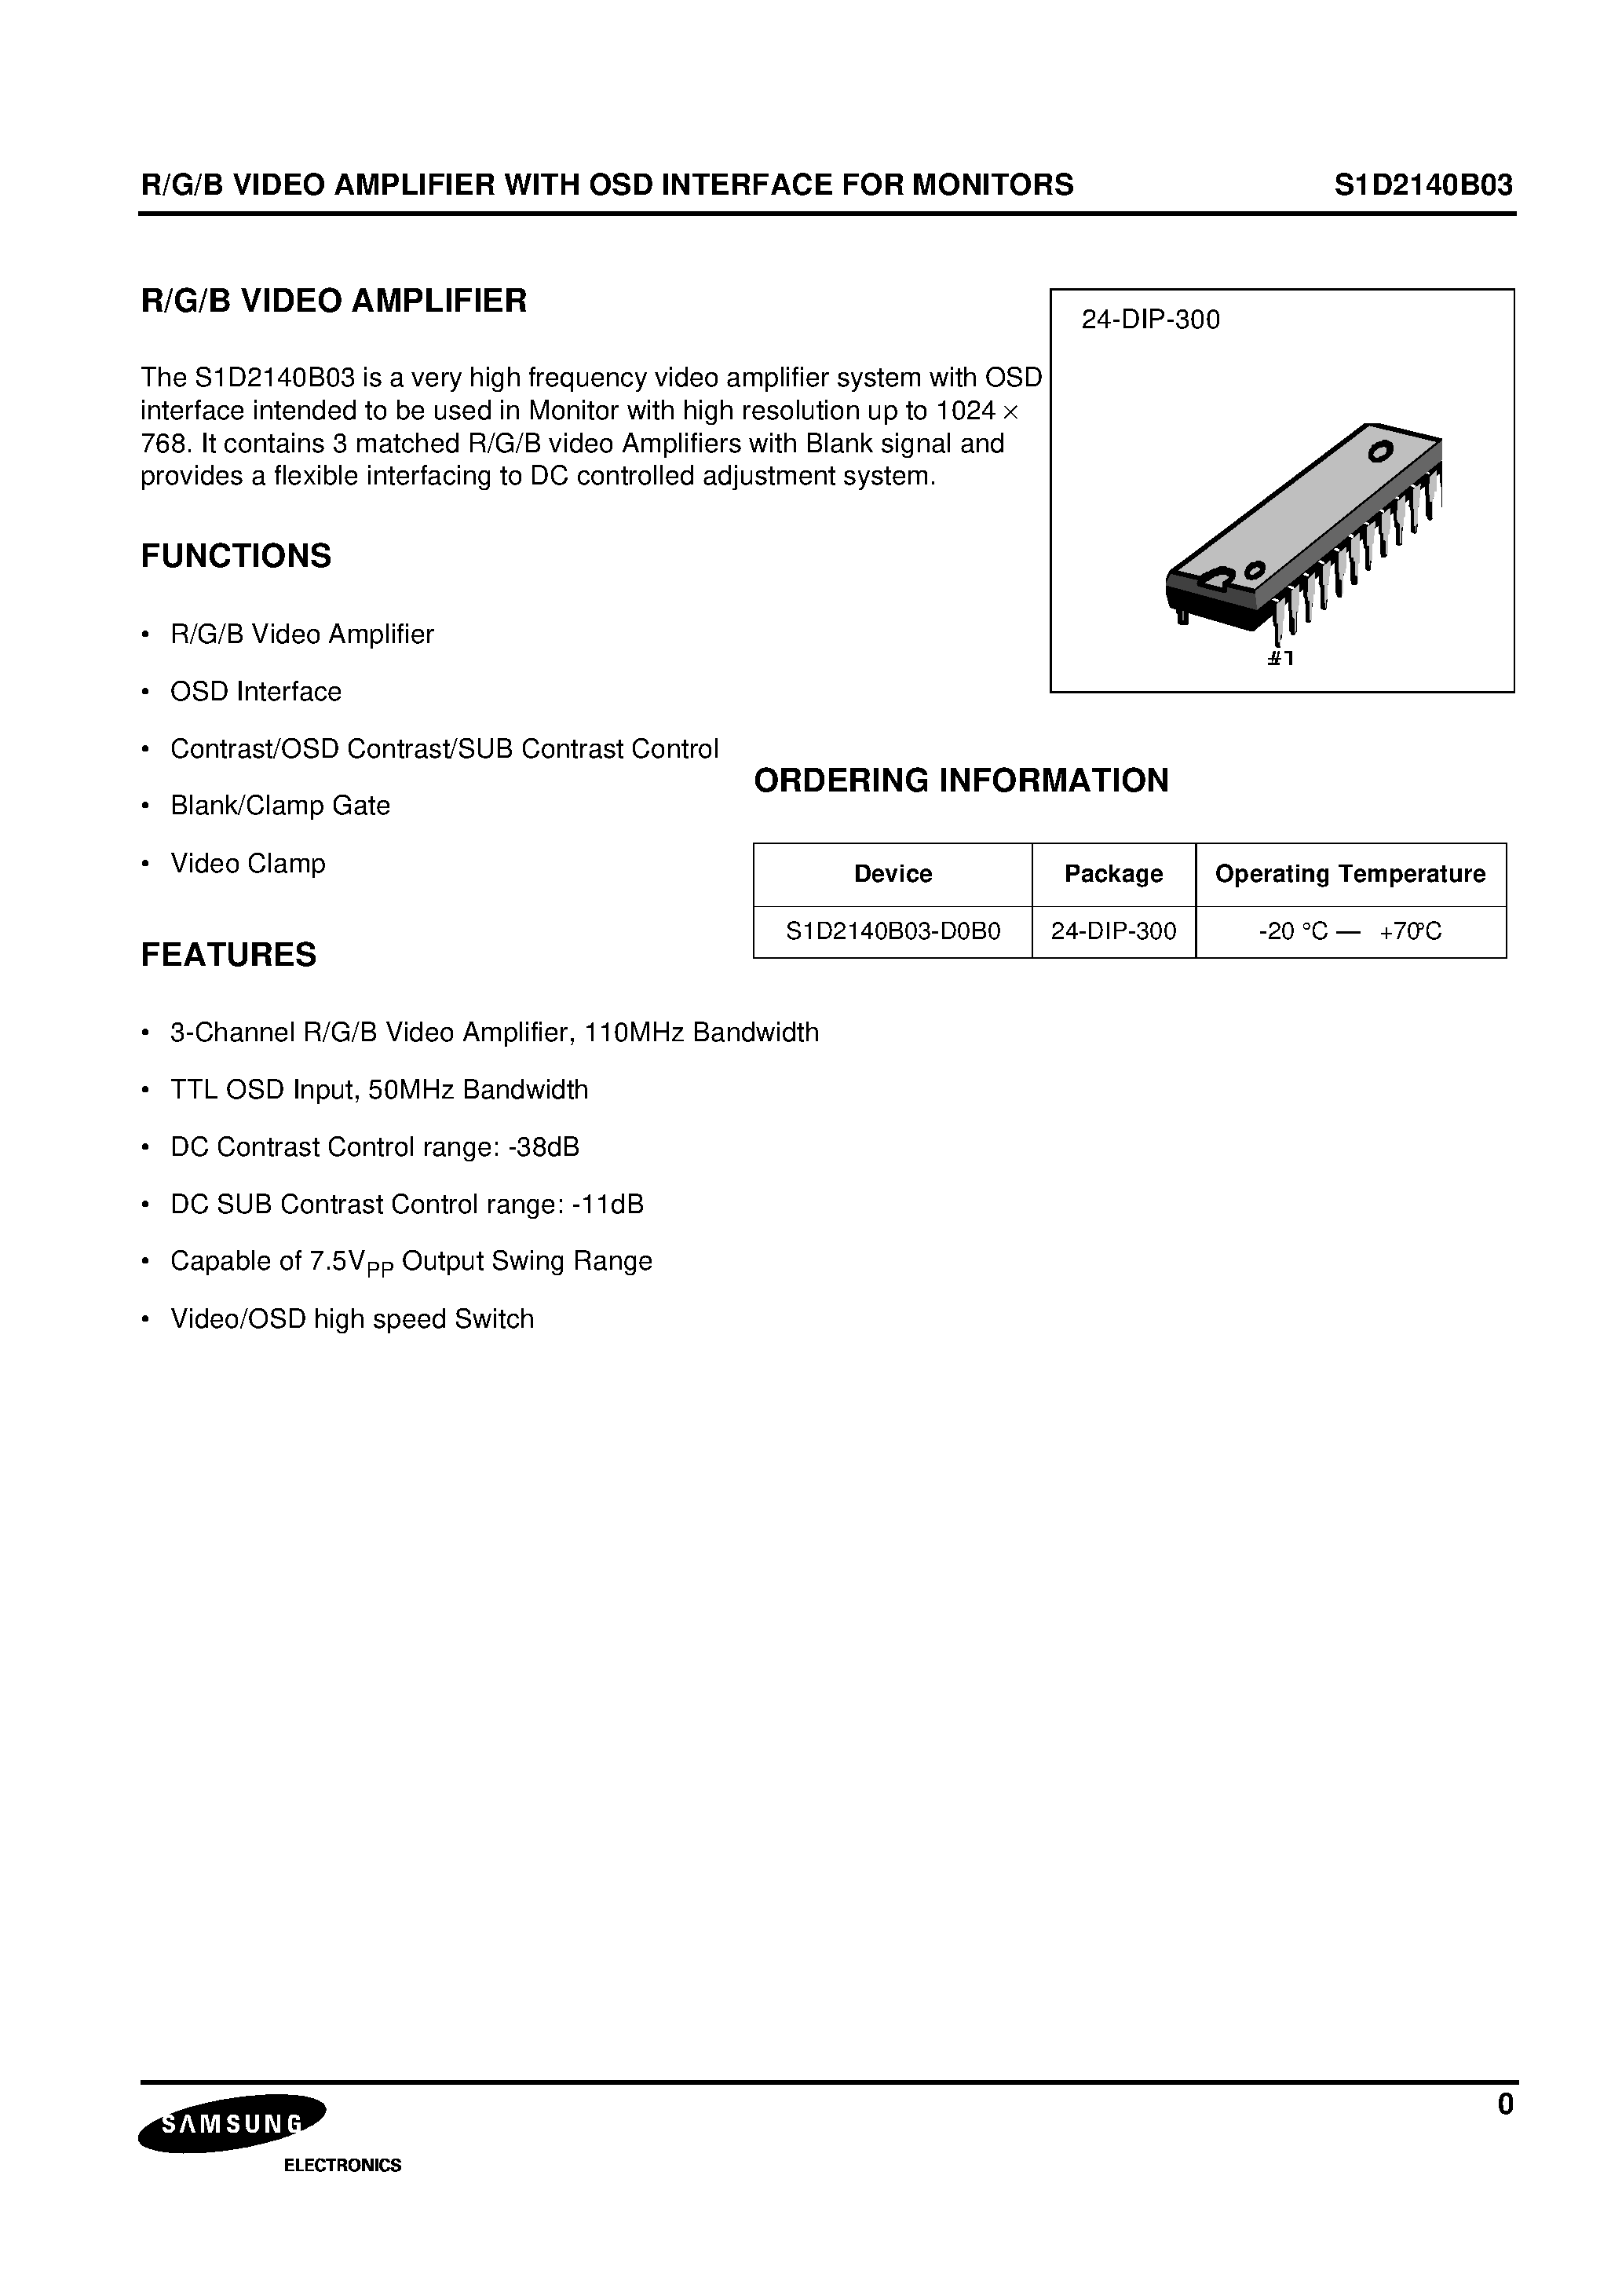 Datasheet S1D2140B03 - R/G/B VIDEO AMPLIFIER WITH OSD INTERFACE FOR MONITORS page 1